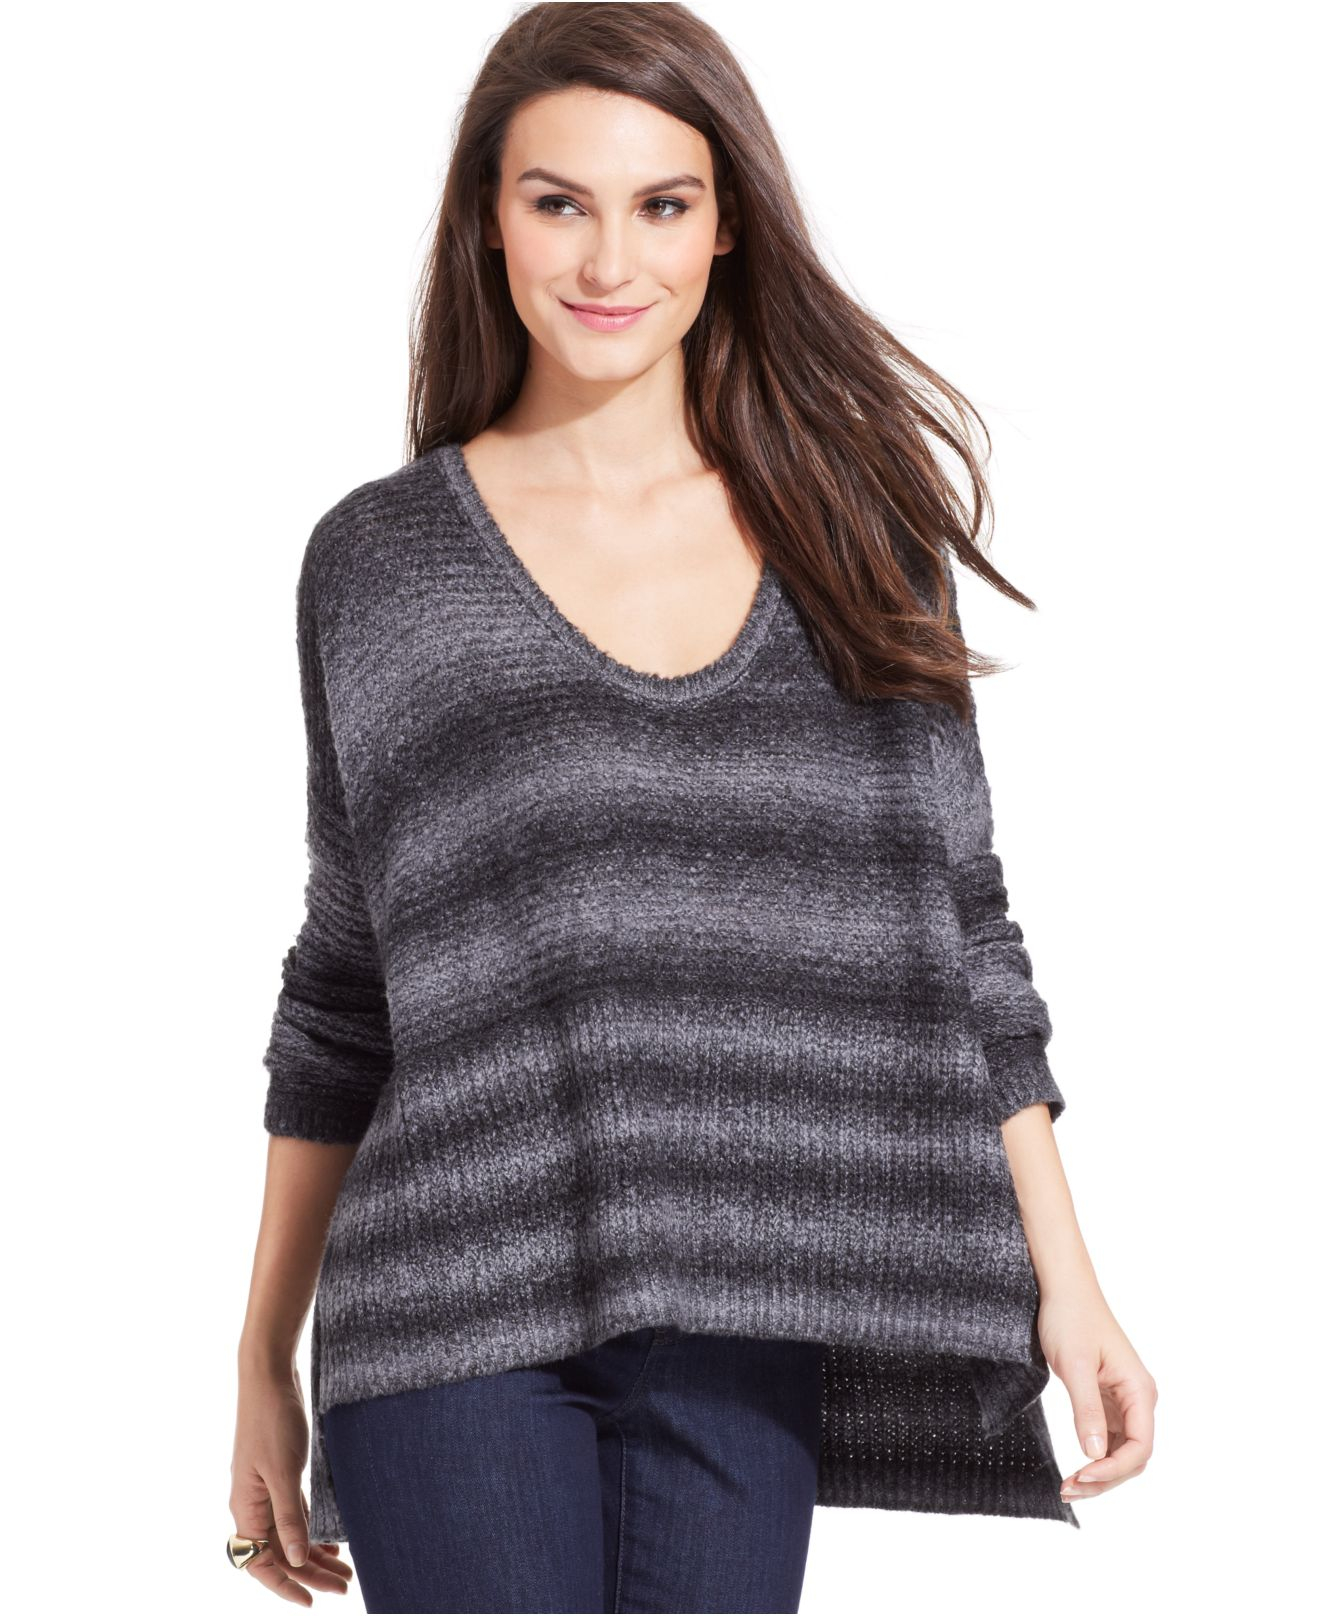 Dkny Long-Sleeve Striped Ombre Sweater in Gray (Charcoal) | Lyst